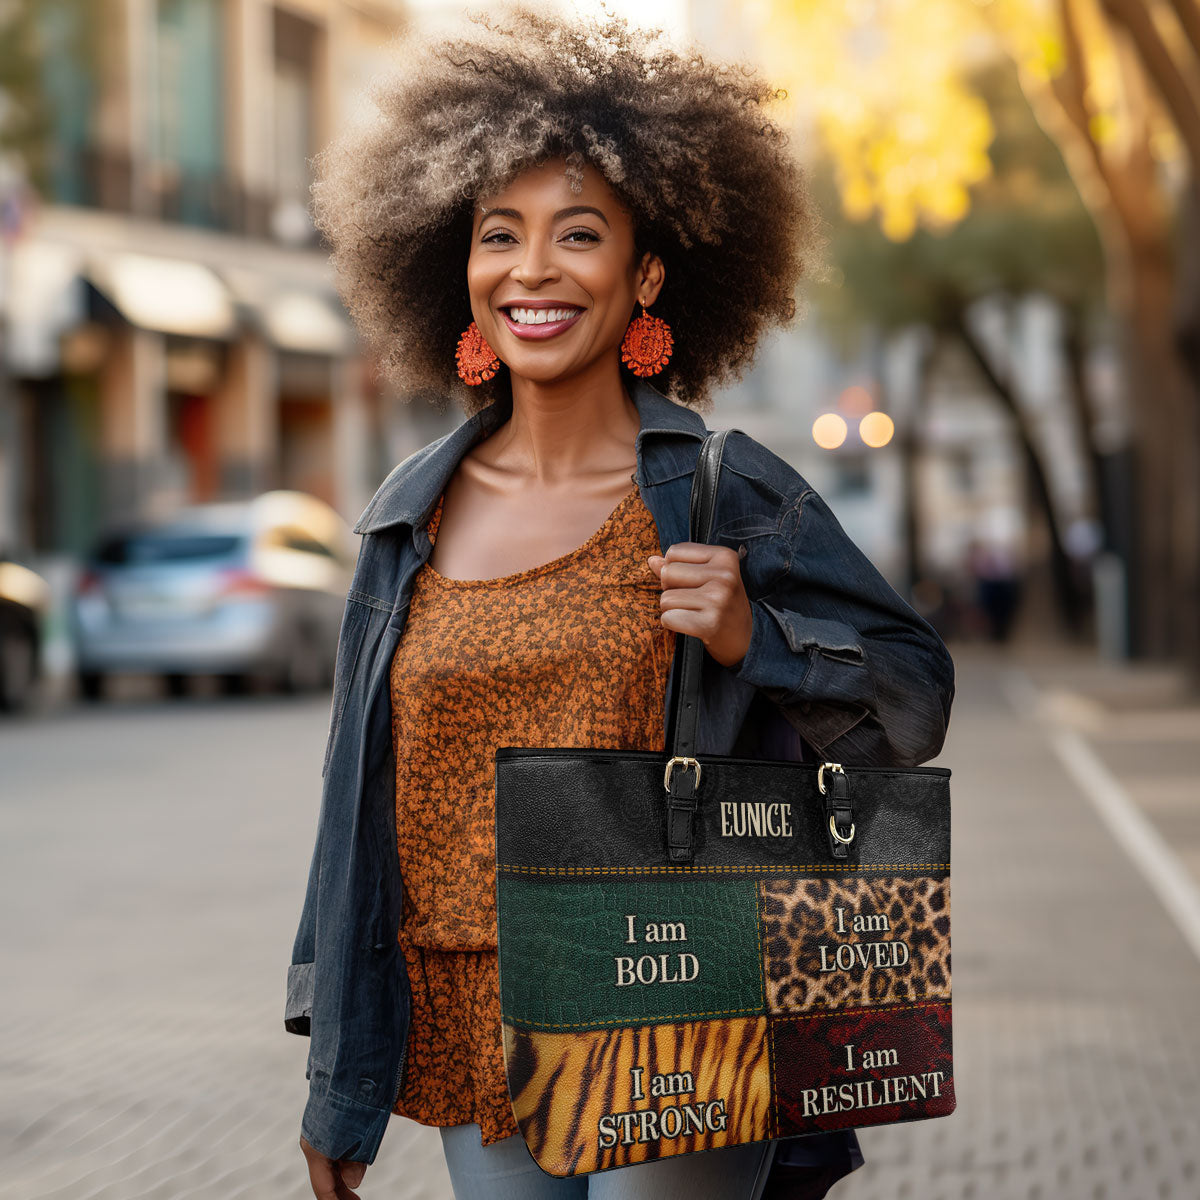 I am BOLD, LOVED, STRONG, RESILIENT - Personalized Leather Totebag STB49